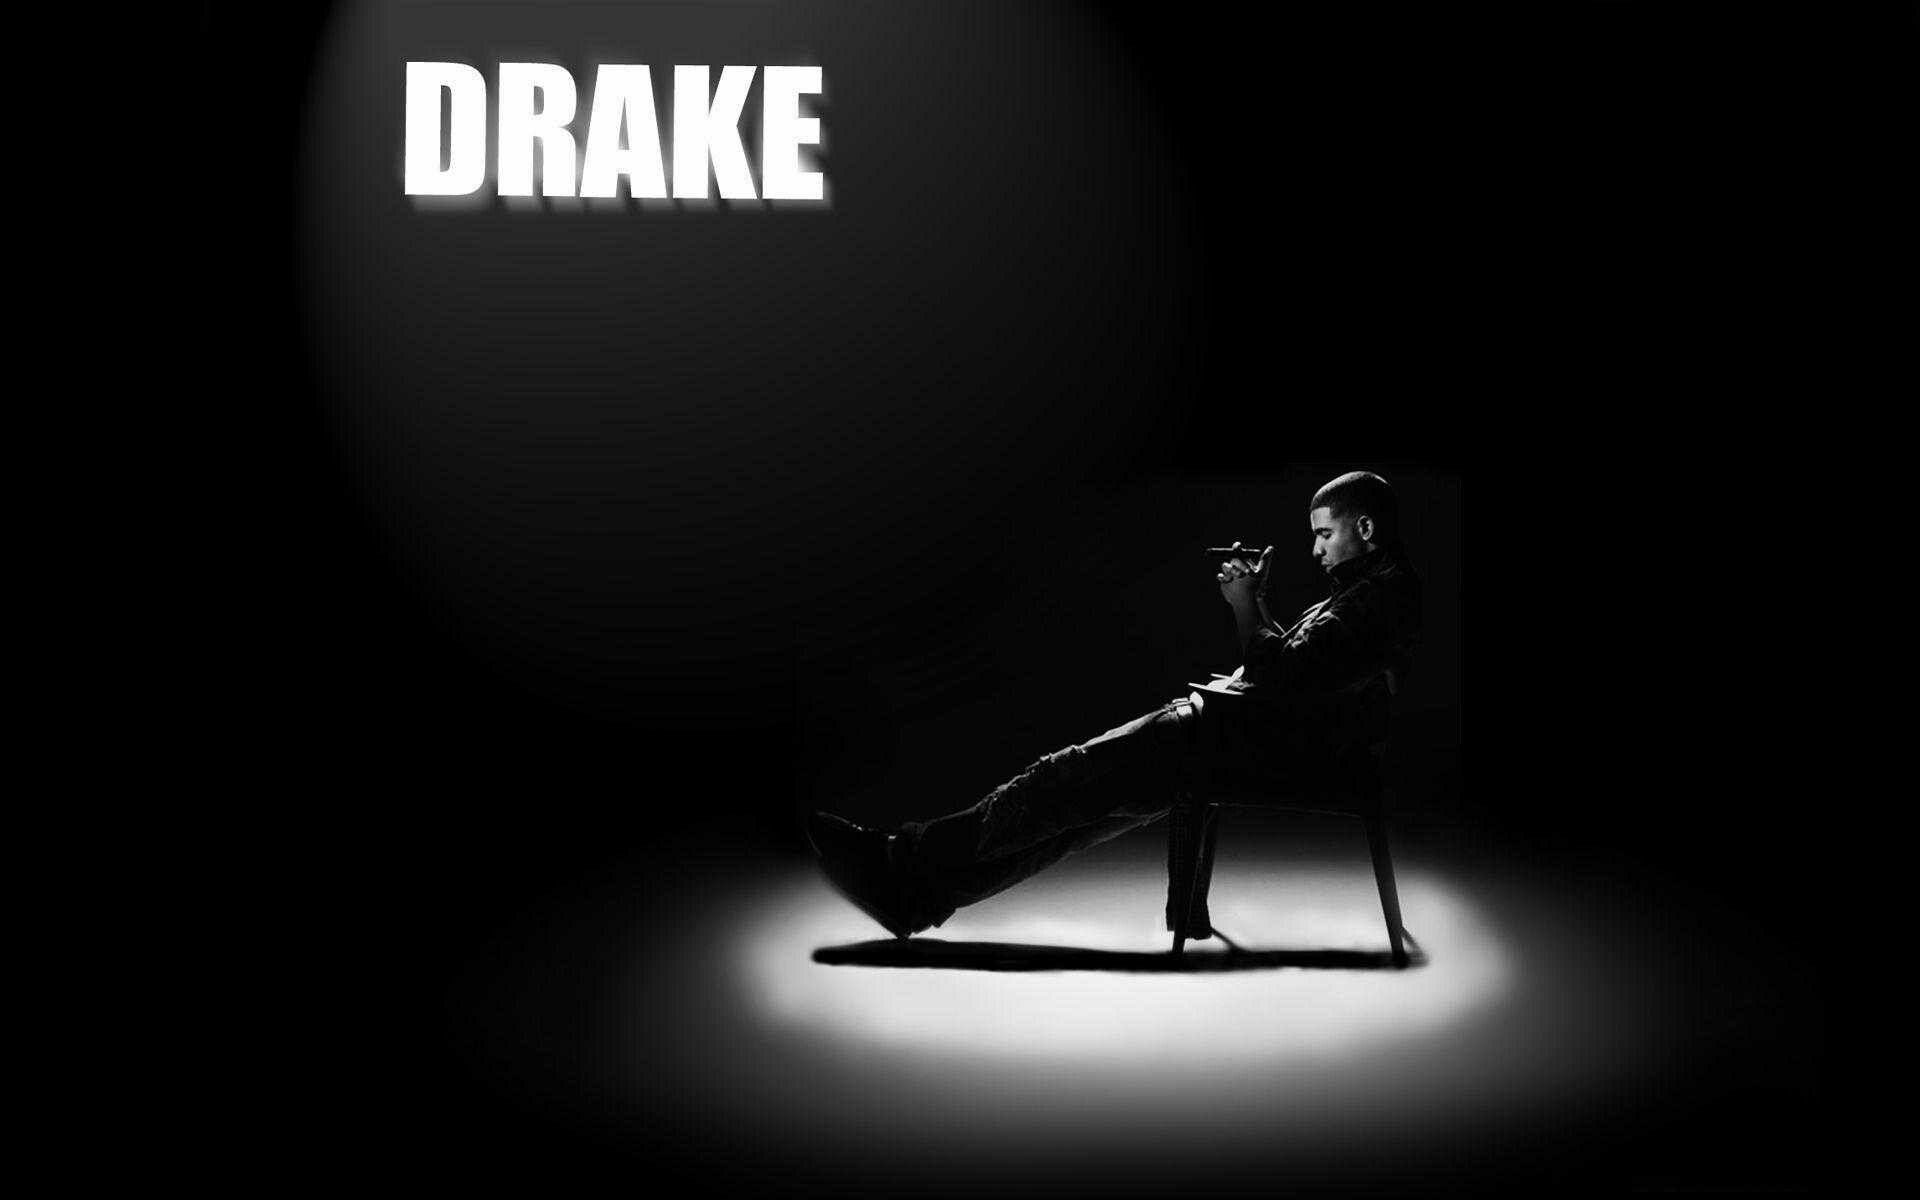 Drake: A rapper from Toronto, OVO Sound, Black and white. 1920x1200 HD Background.